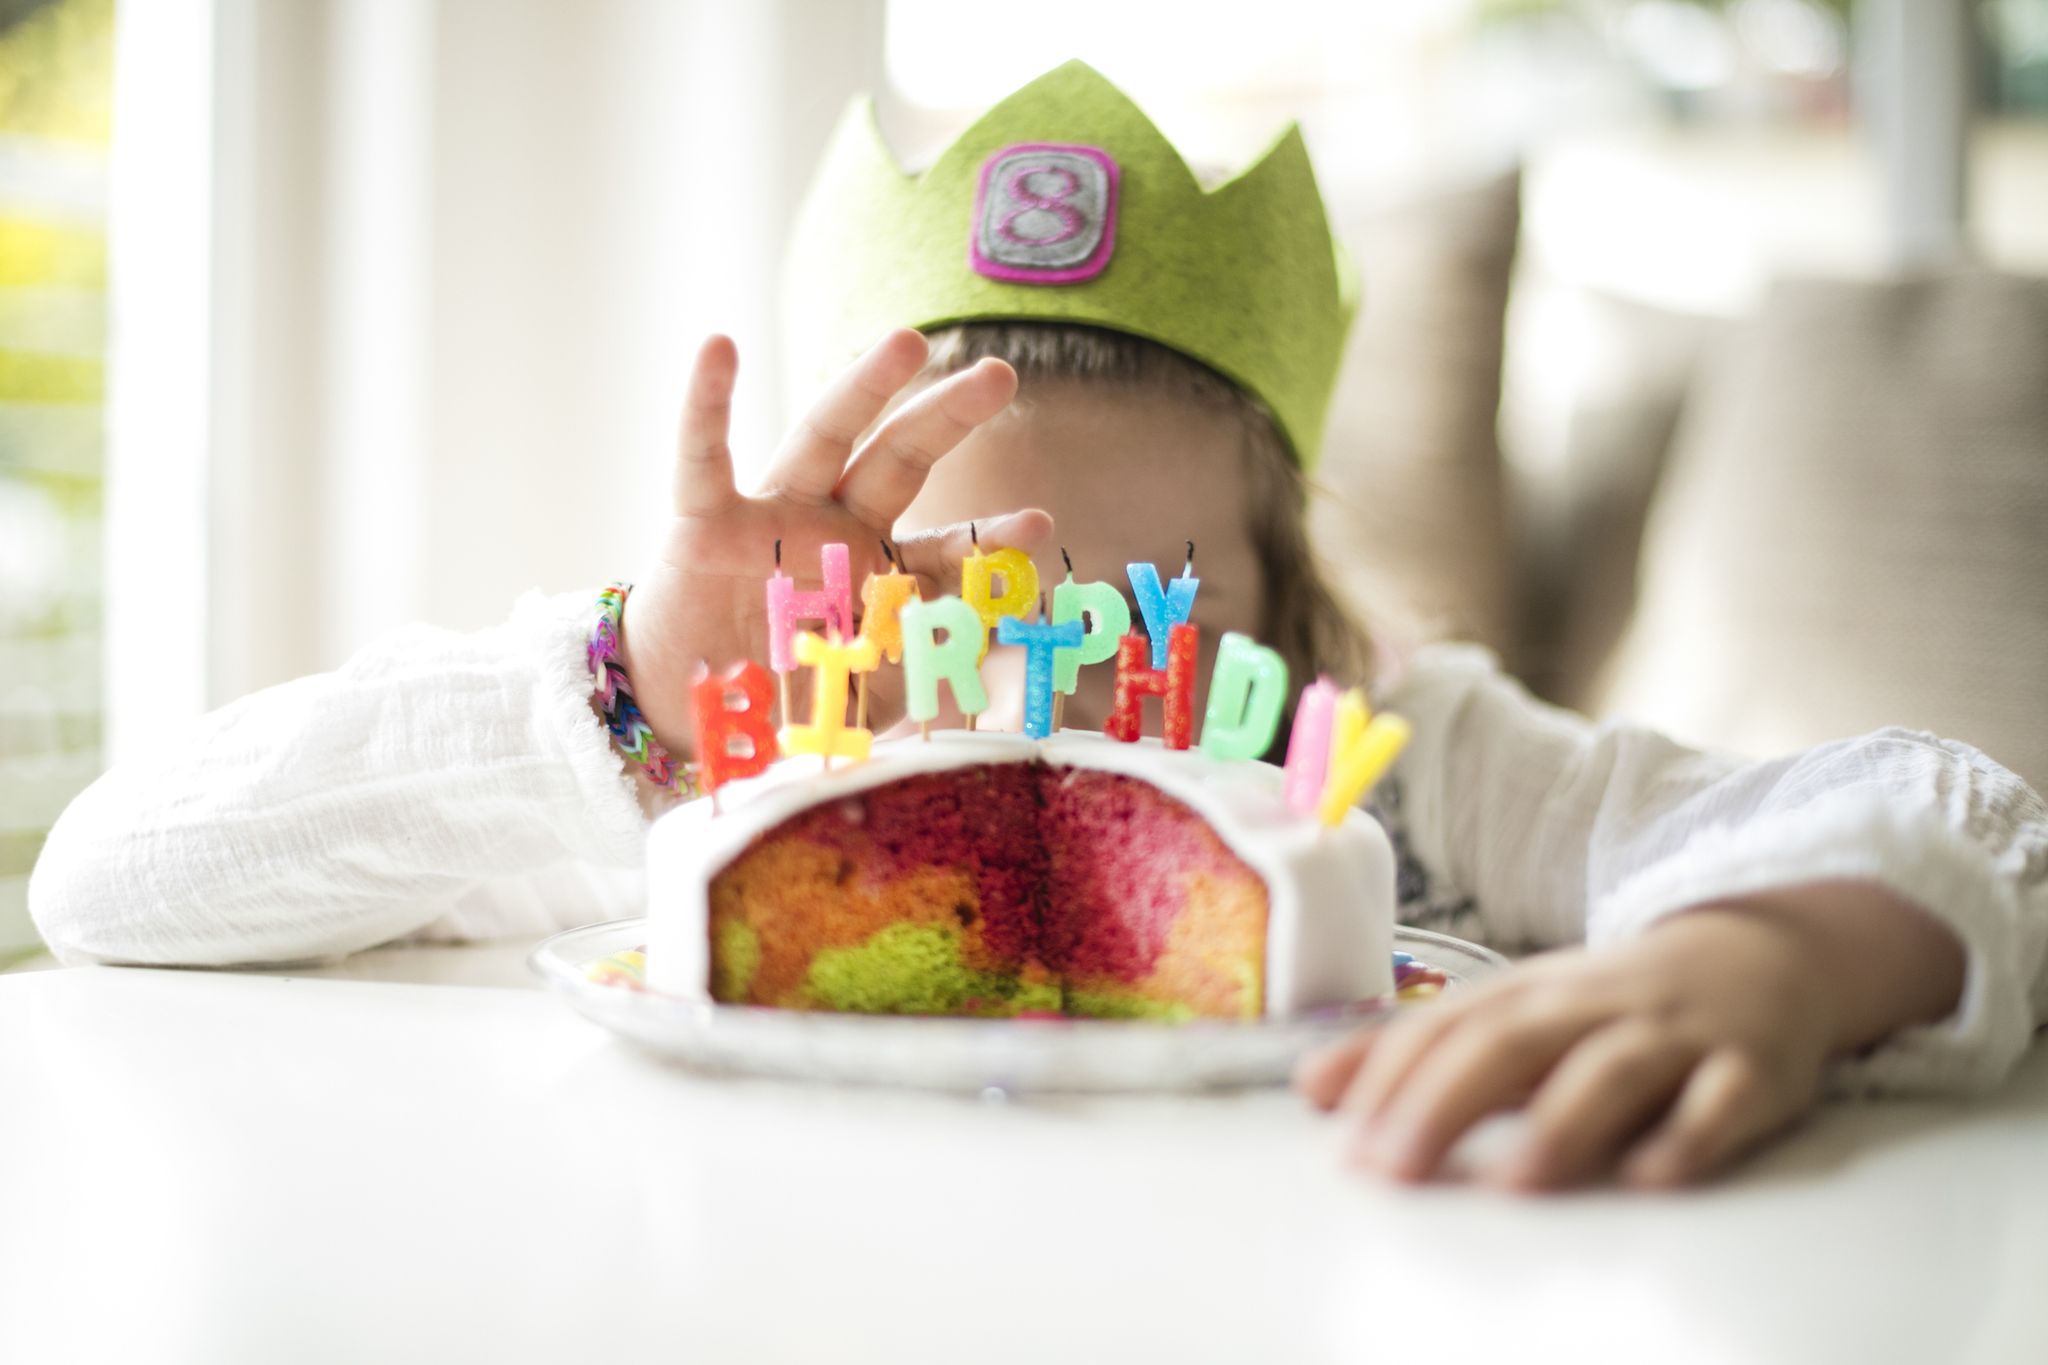 Child, Toddler, Baby, Sweetness, Food, Play, Eating, Crown, Sitting, Party hat, 